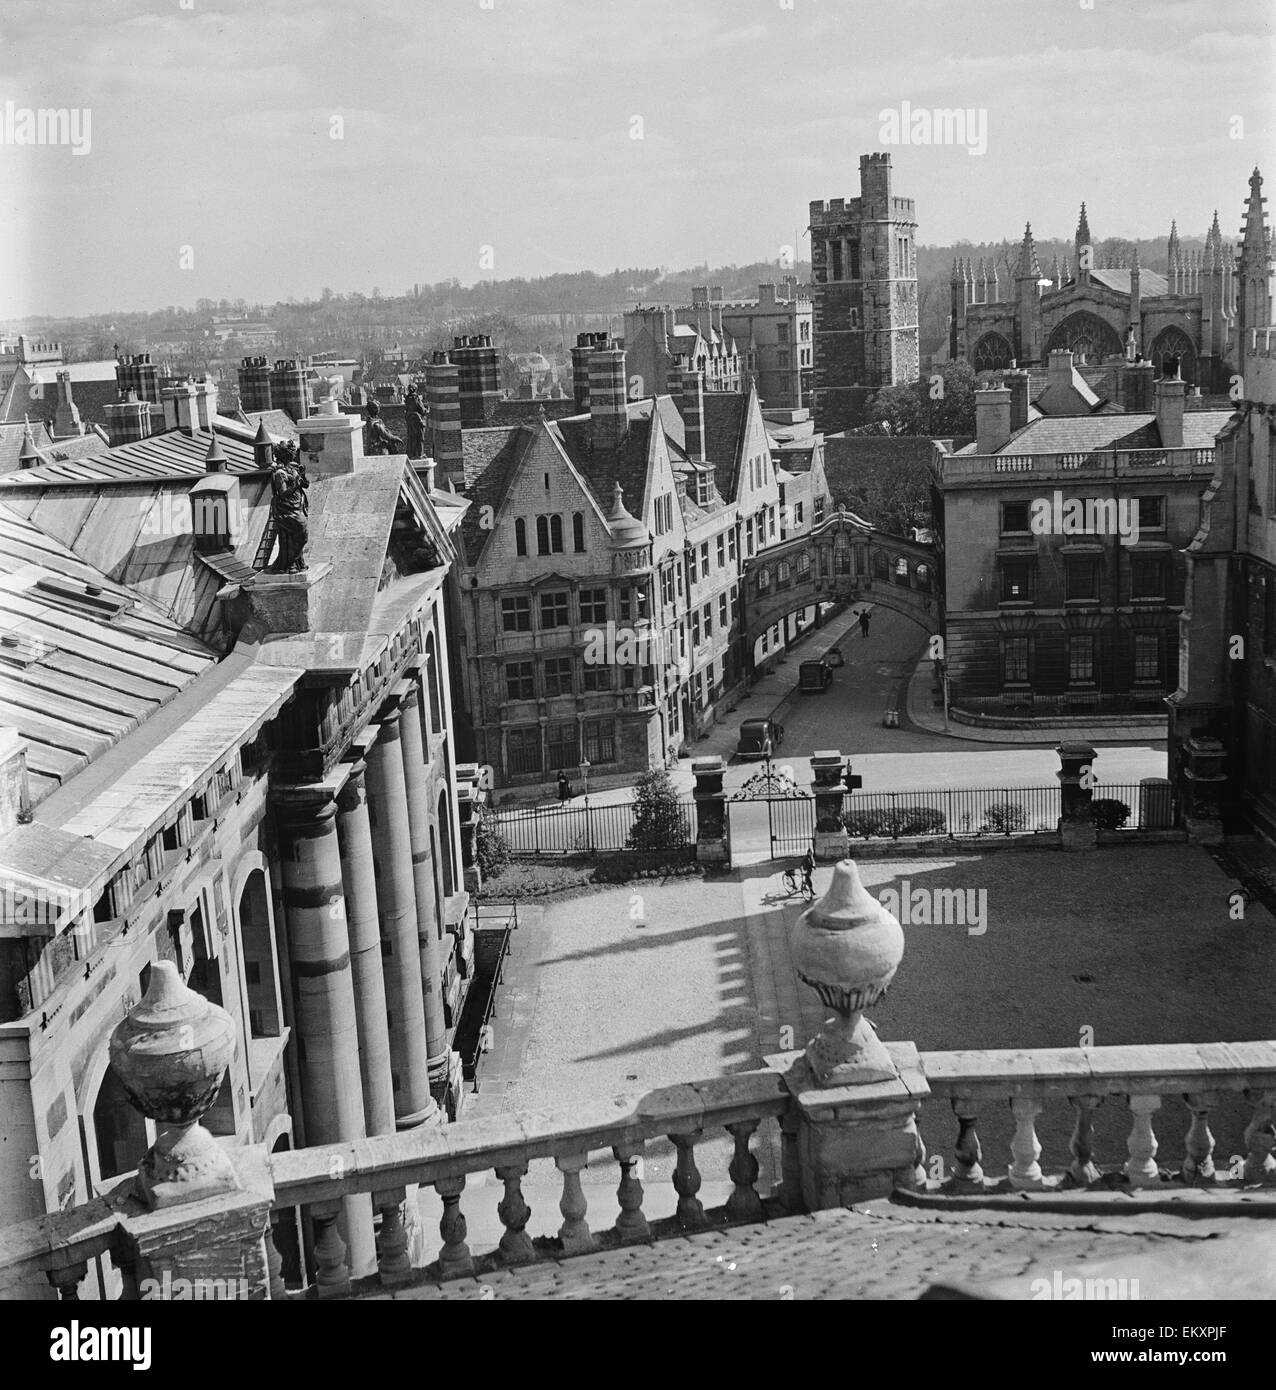 The dreaming spires of Oxford and the Bridge of Sighs seen from the roof of the Sheldonian Theatre. In the foreground is Hertford College with the tower of the Cathedral in the centre of the picture. The spires of Christ Church are to the right in the bac Stock Photo